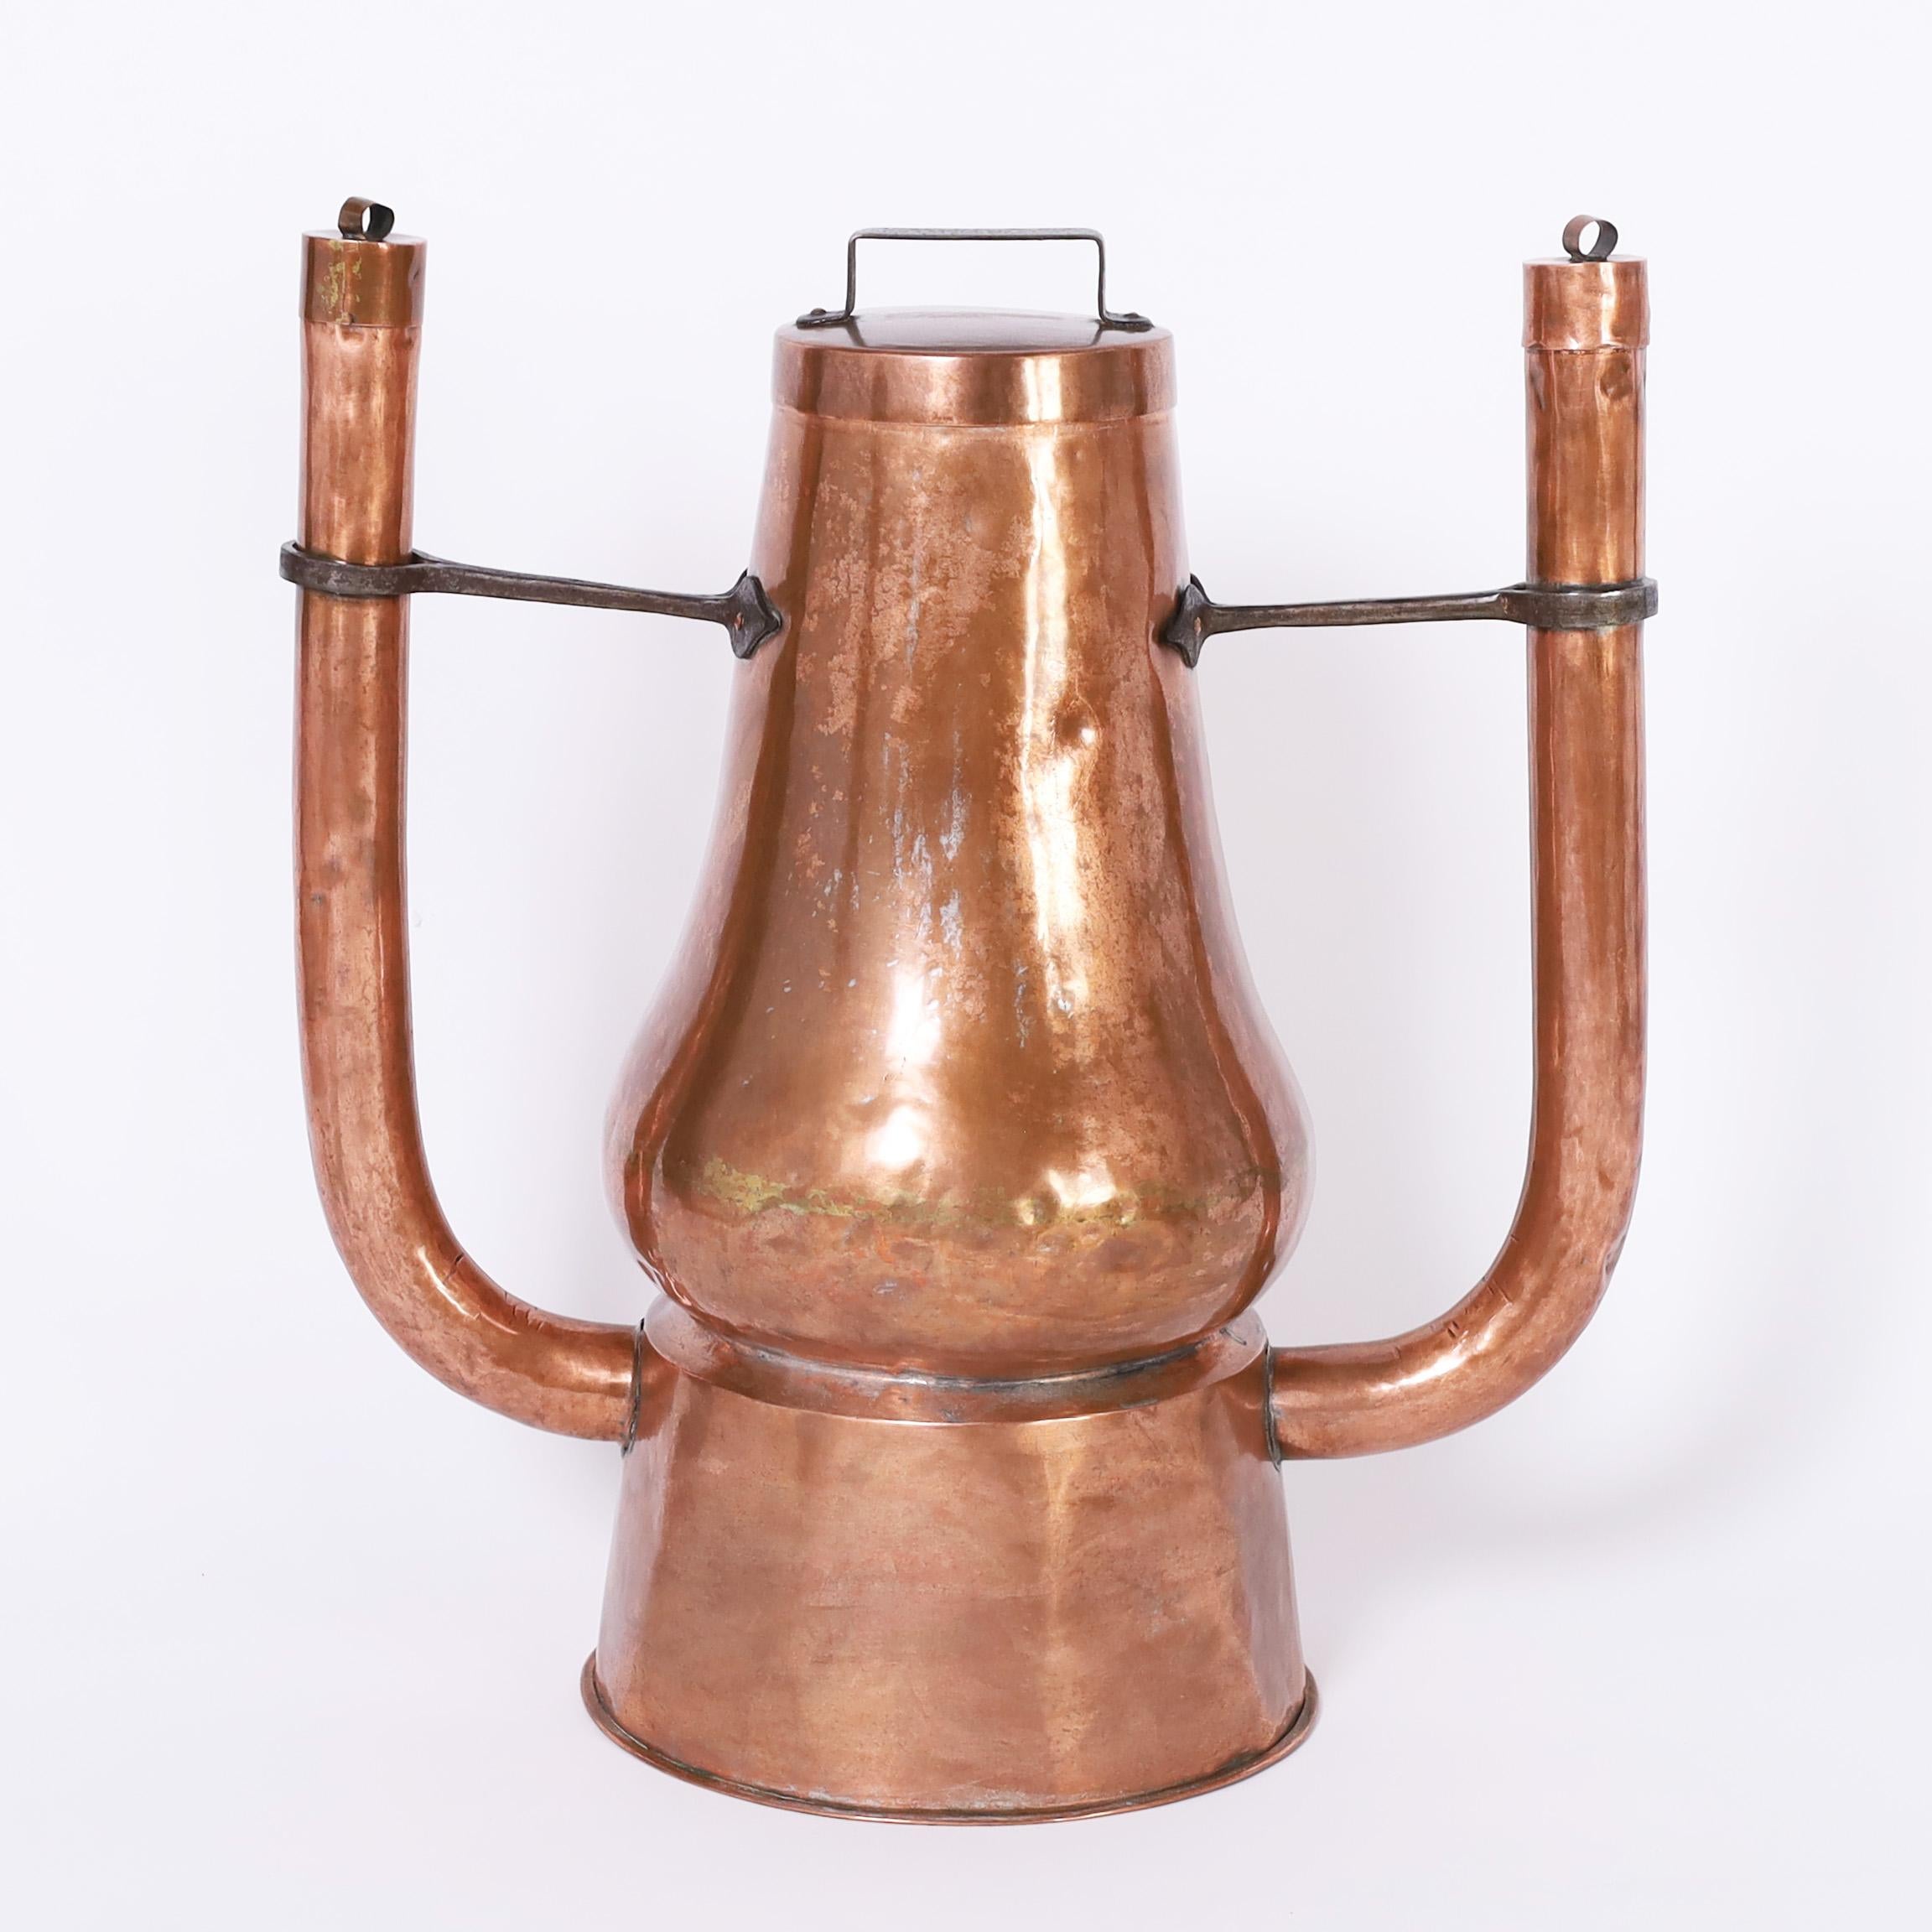 Rare pair of 18th Century French bath warmers handcrafted with copper and  iron in utilitarian yet sculptural form, still functional and miraculously retaining the original lids.